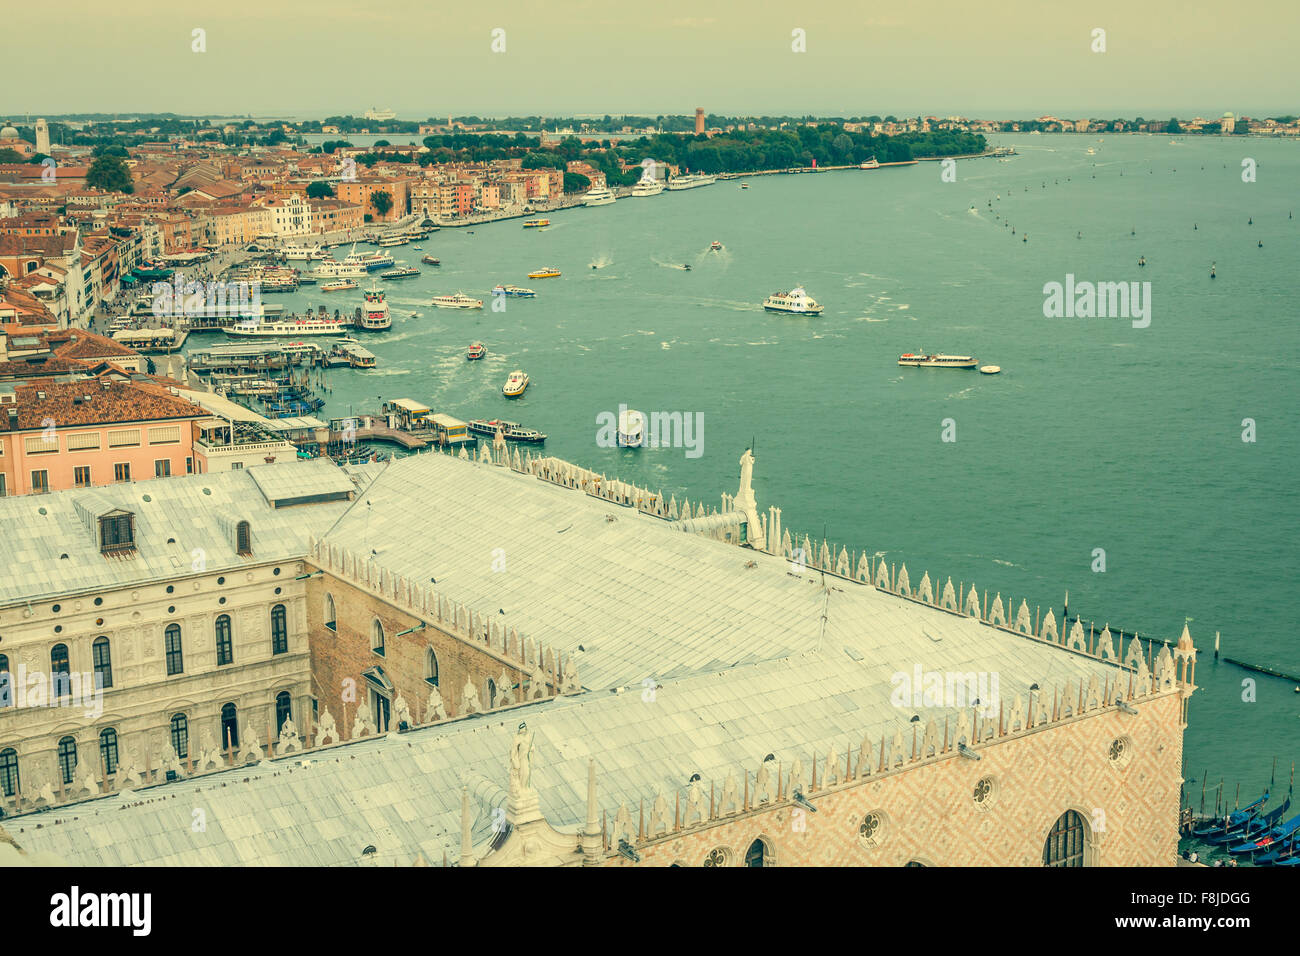 View of Venice city from the top of the bell tower at the San Marco Square, Italy Stock Photo